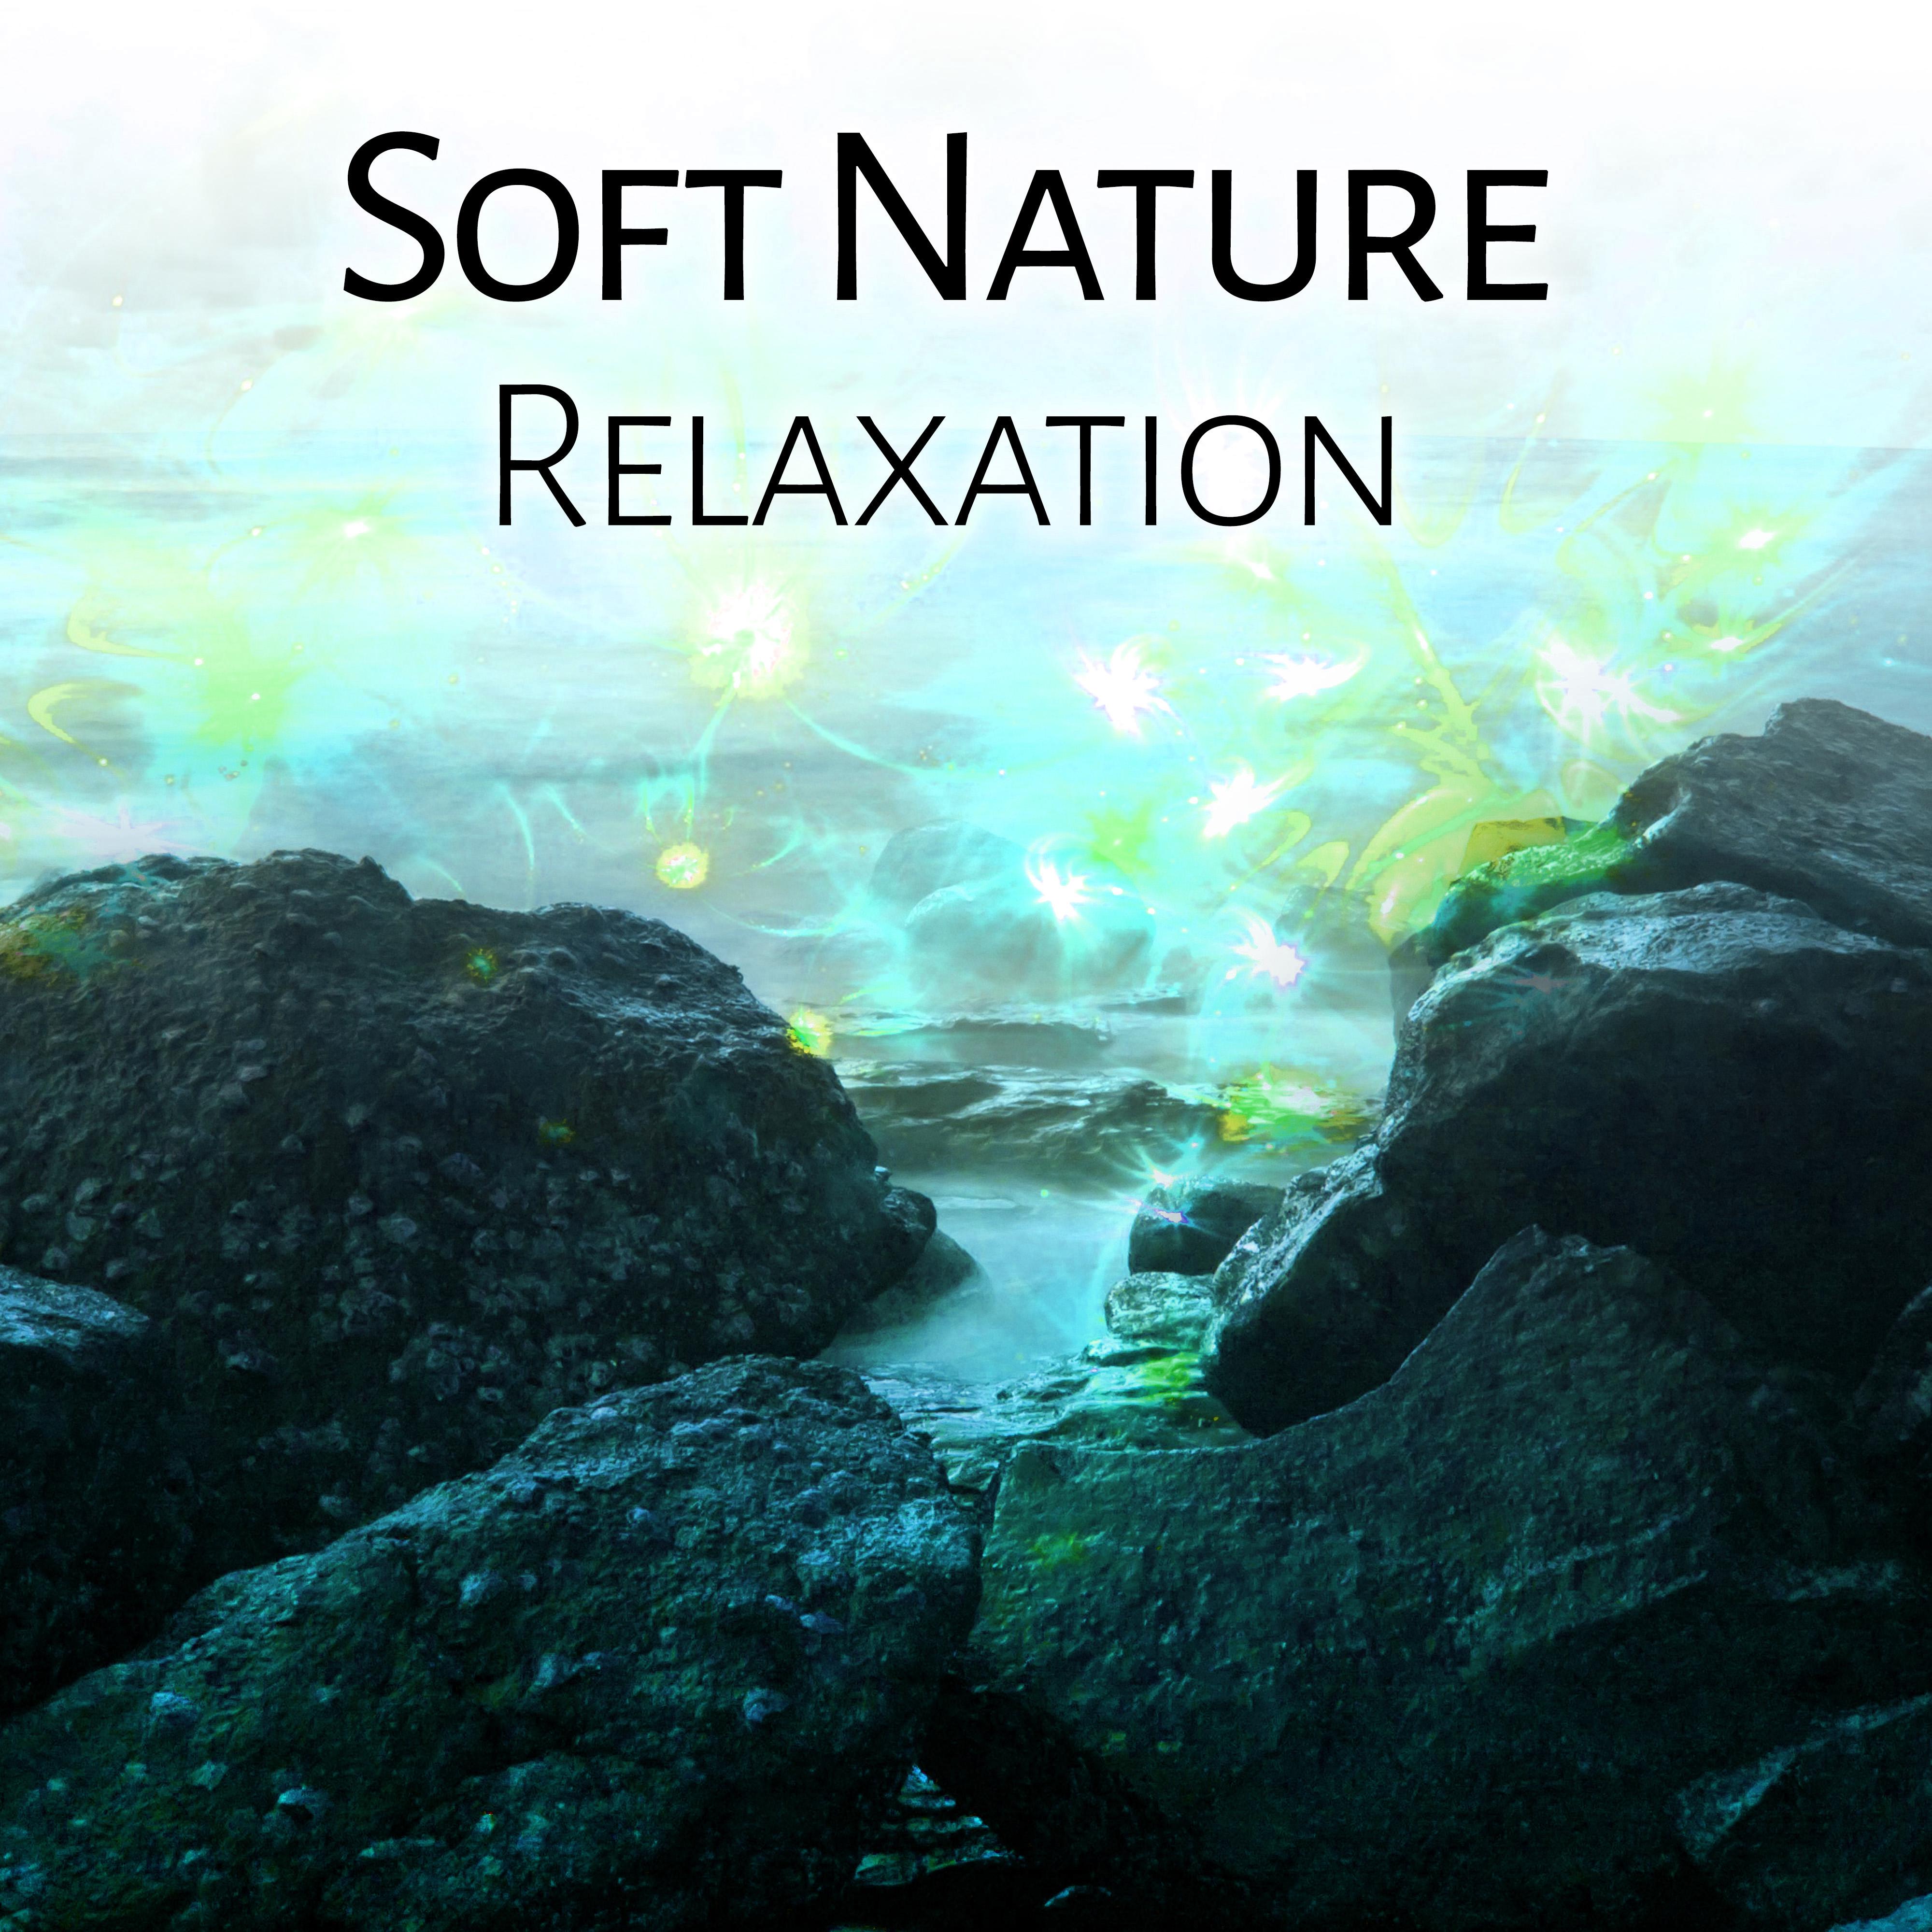 Soft Nature Relaxation – Calm Sounds, Nature Waves, Healing Music, New Age to Rest, Chilled Melodies